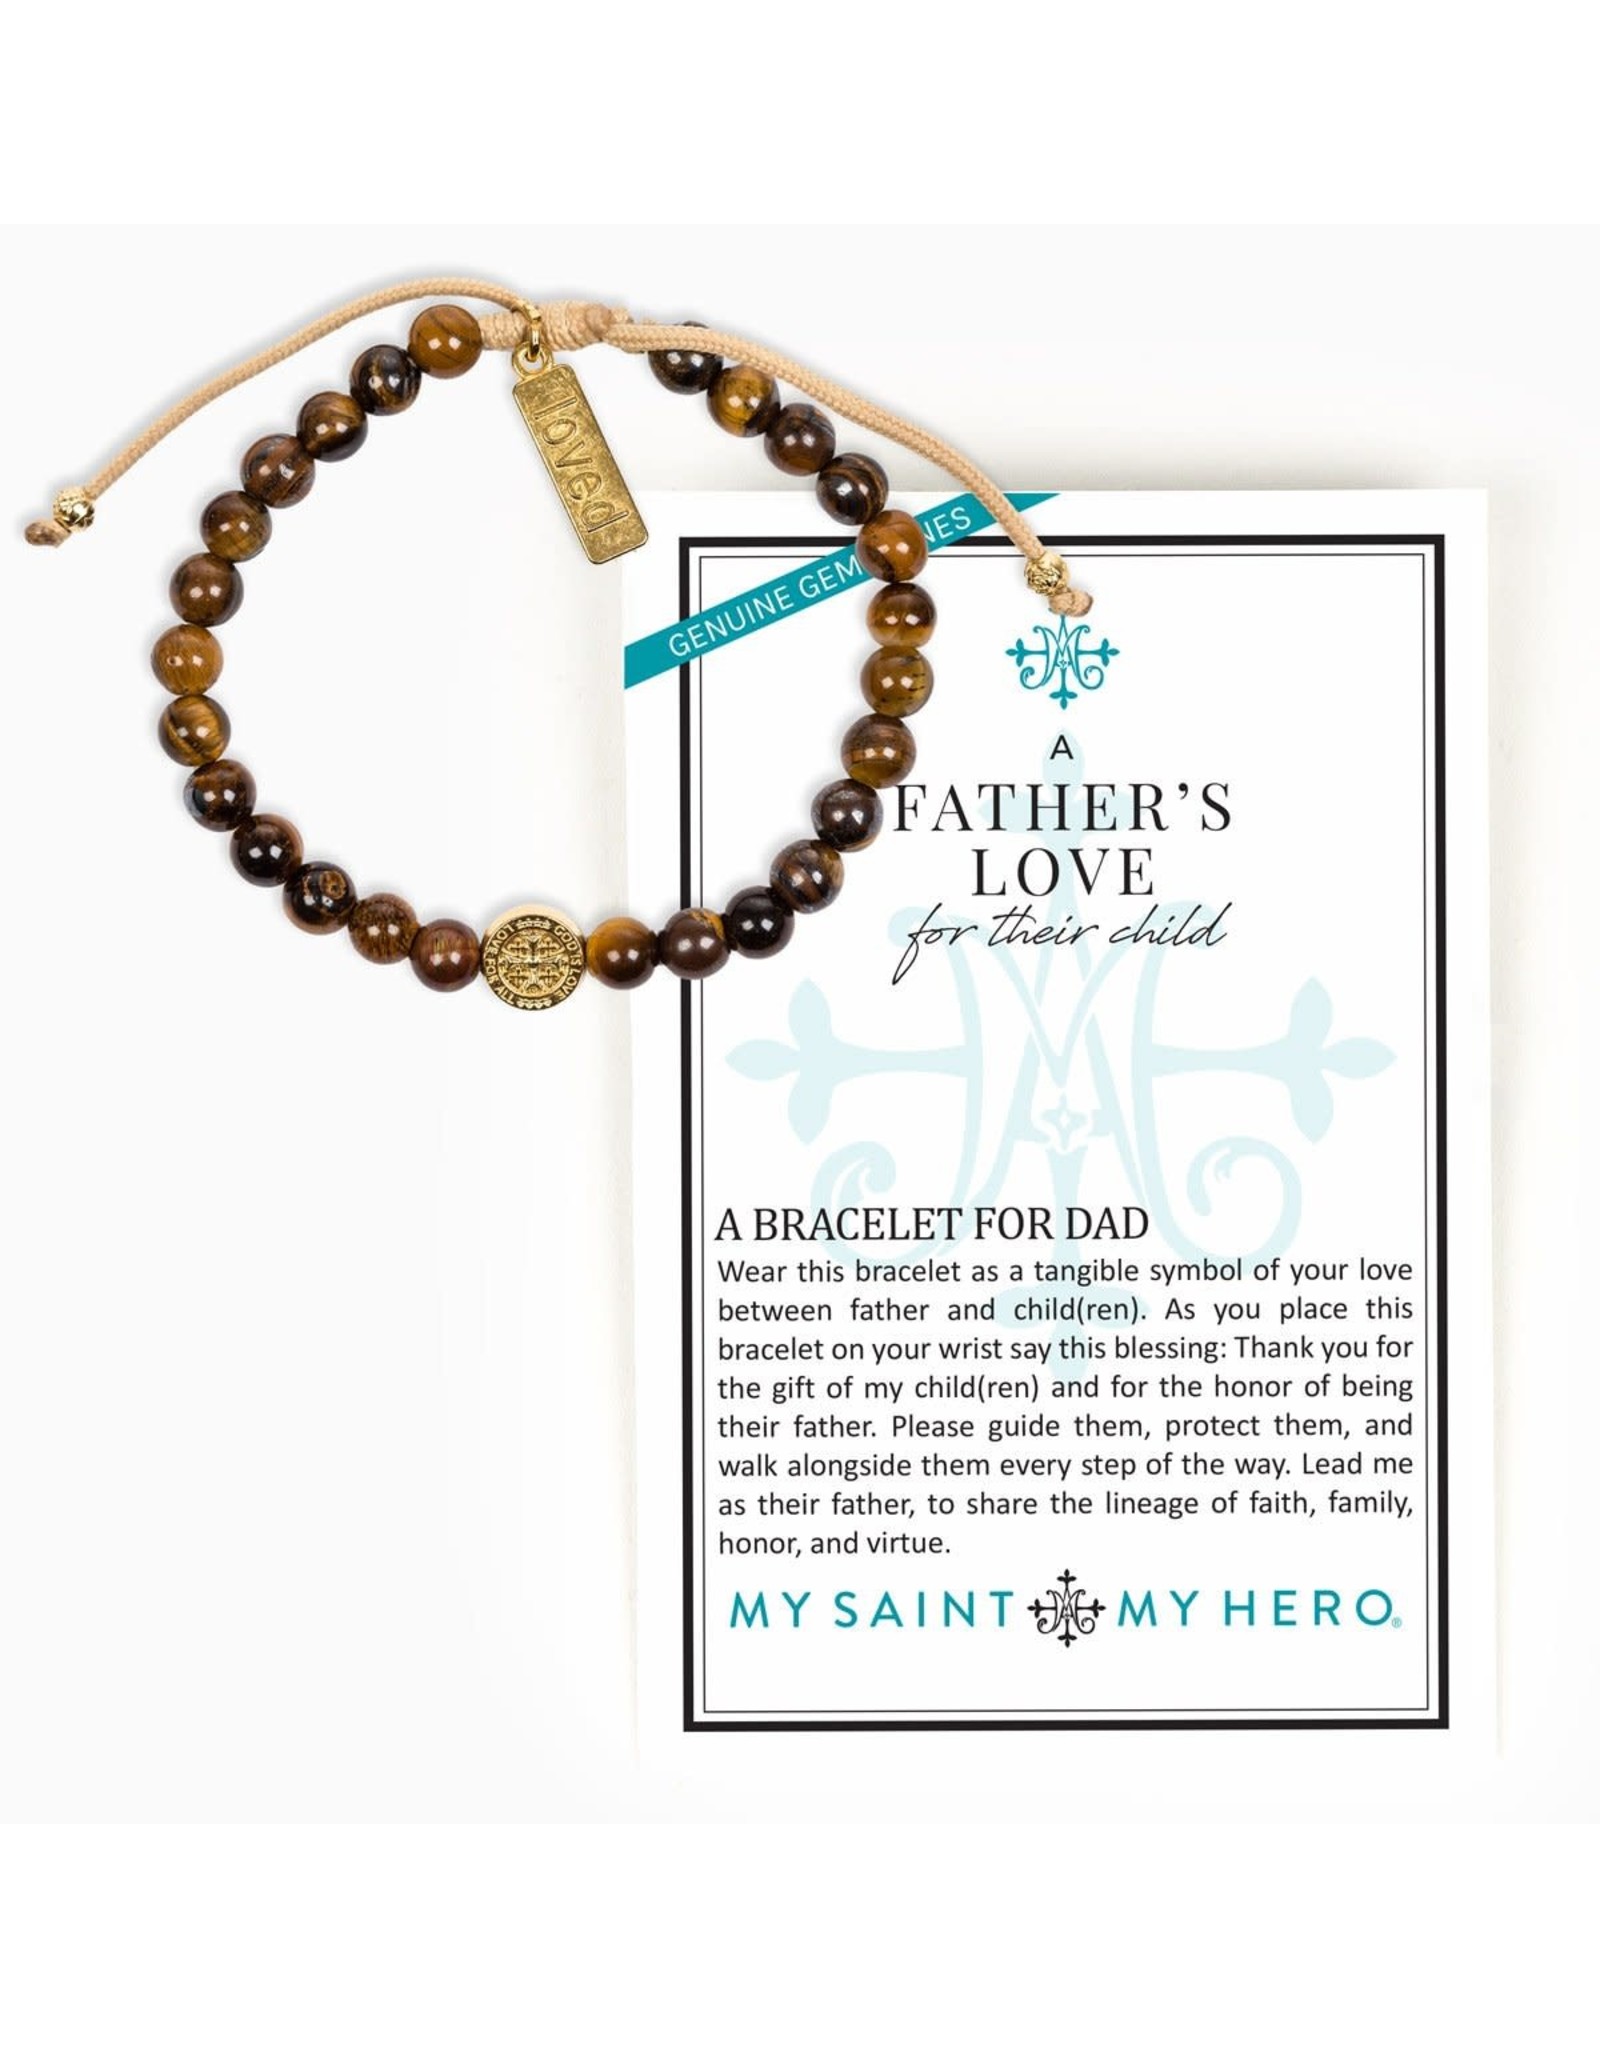 Bracelet - A Father's Love, Blessing for my Child - Gold/Tan/Tiger's Eye